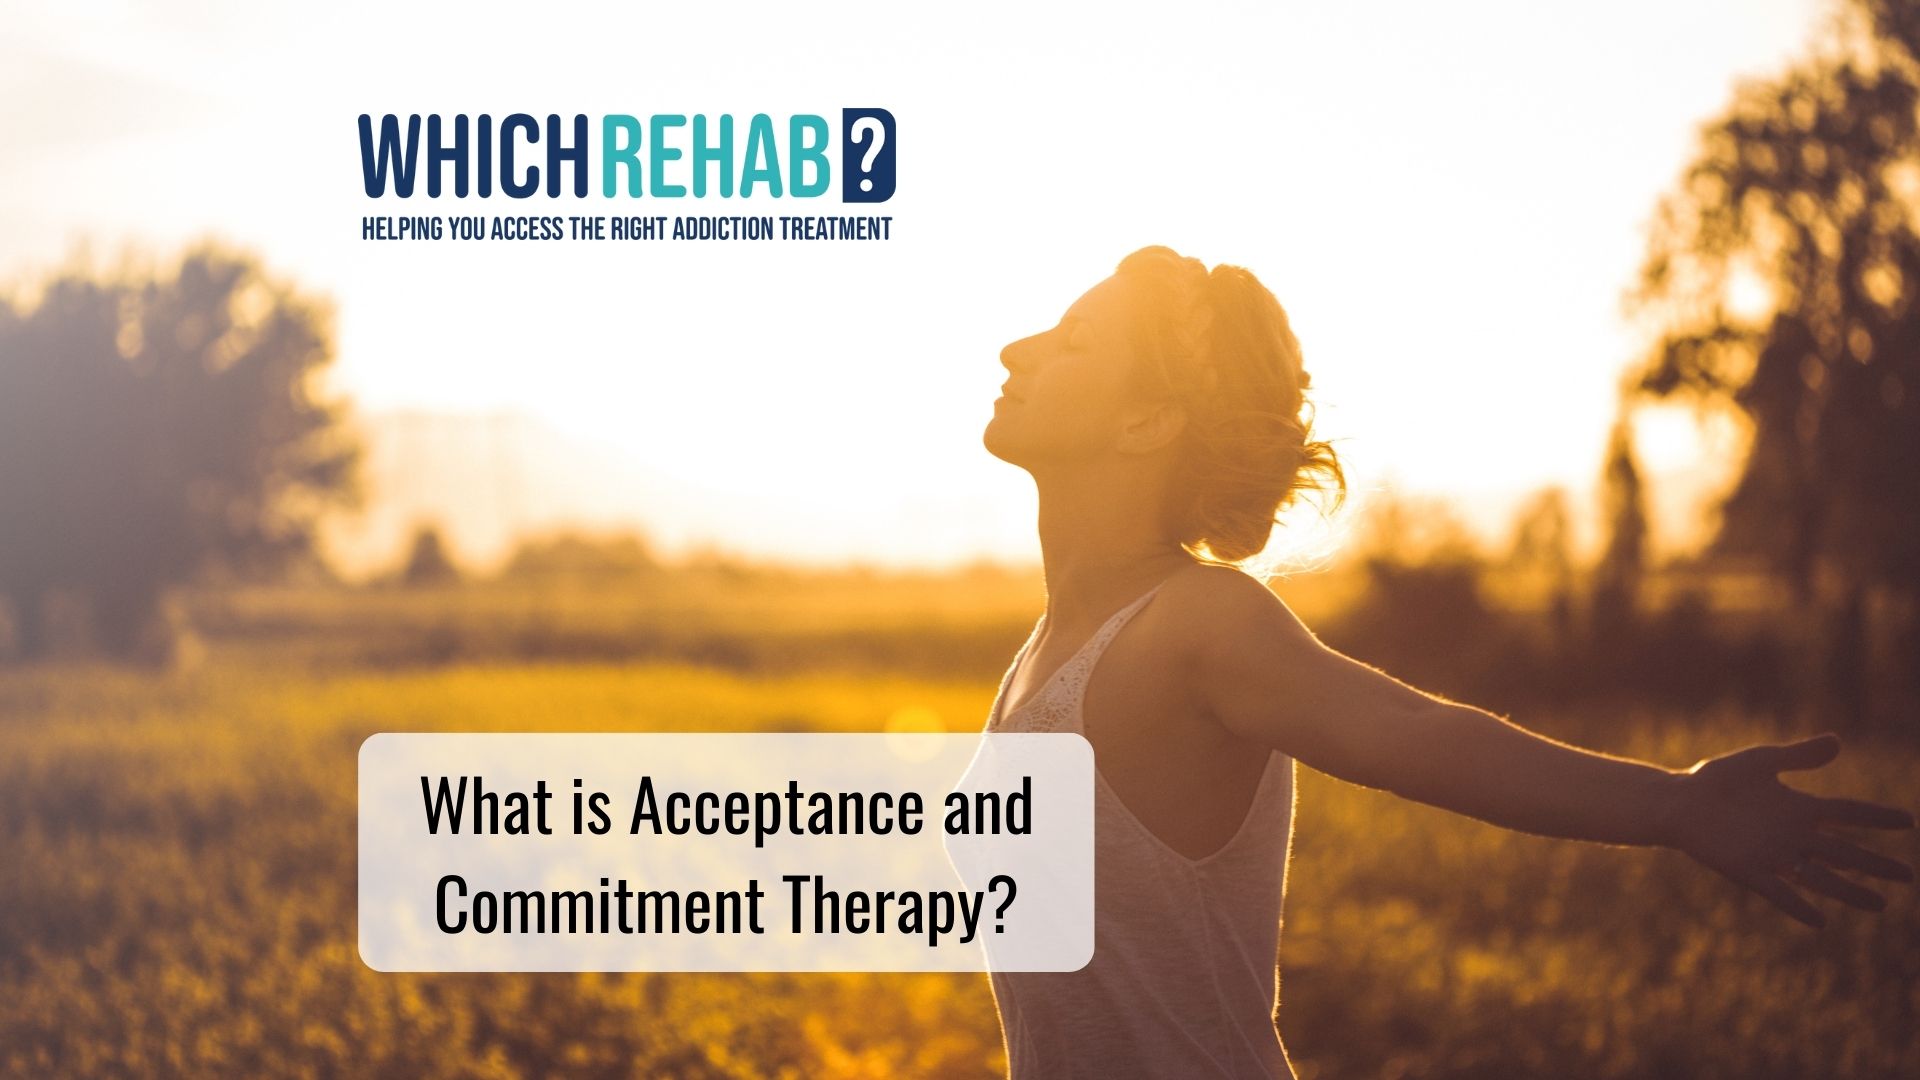 A woman spreading her arms in the sunset - acceptance and commitment therapy - Which rehab